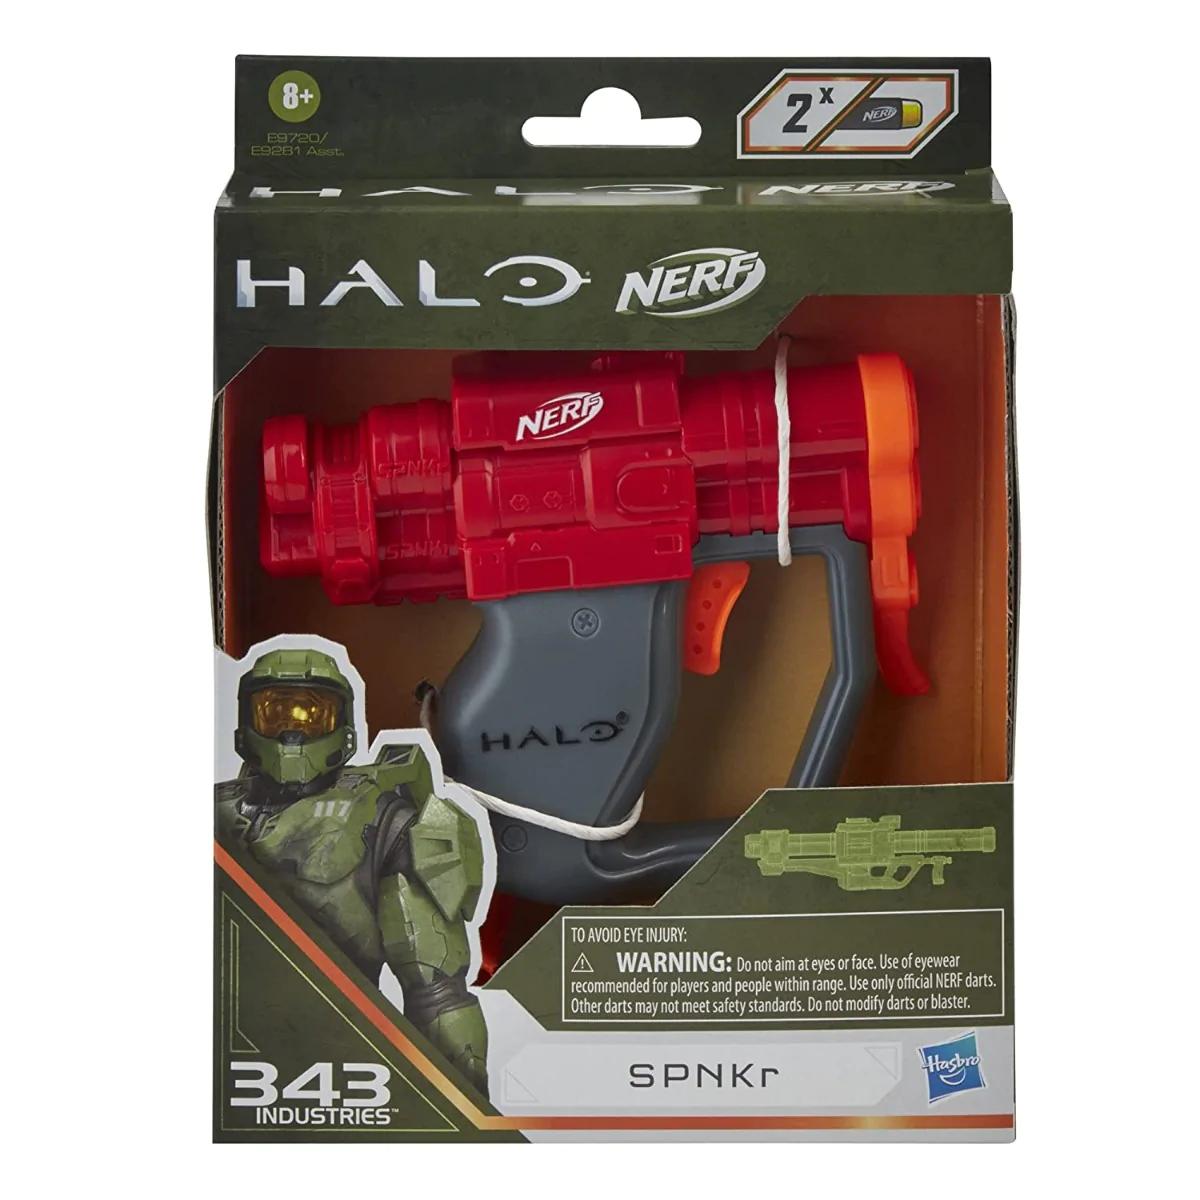 nerf_microshots_halo_spnkr_mini_dart-firing_blaster_and_2_nerf_darts_collectible_blaster_for_halo_video_game_fans_and_nerf_battlers_3